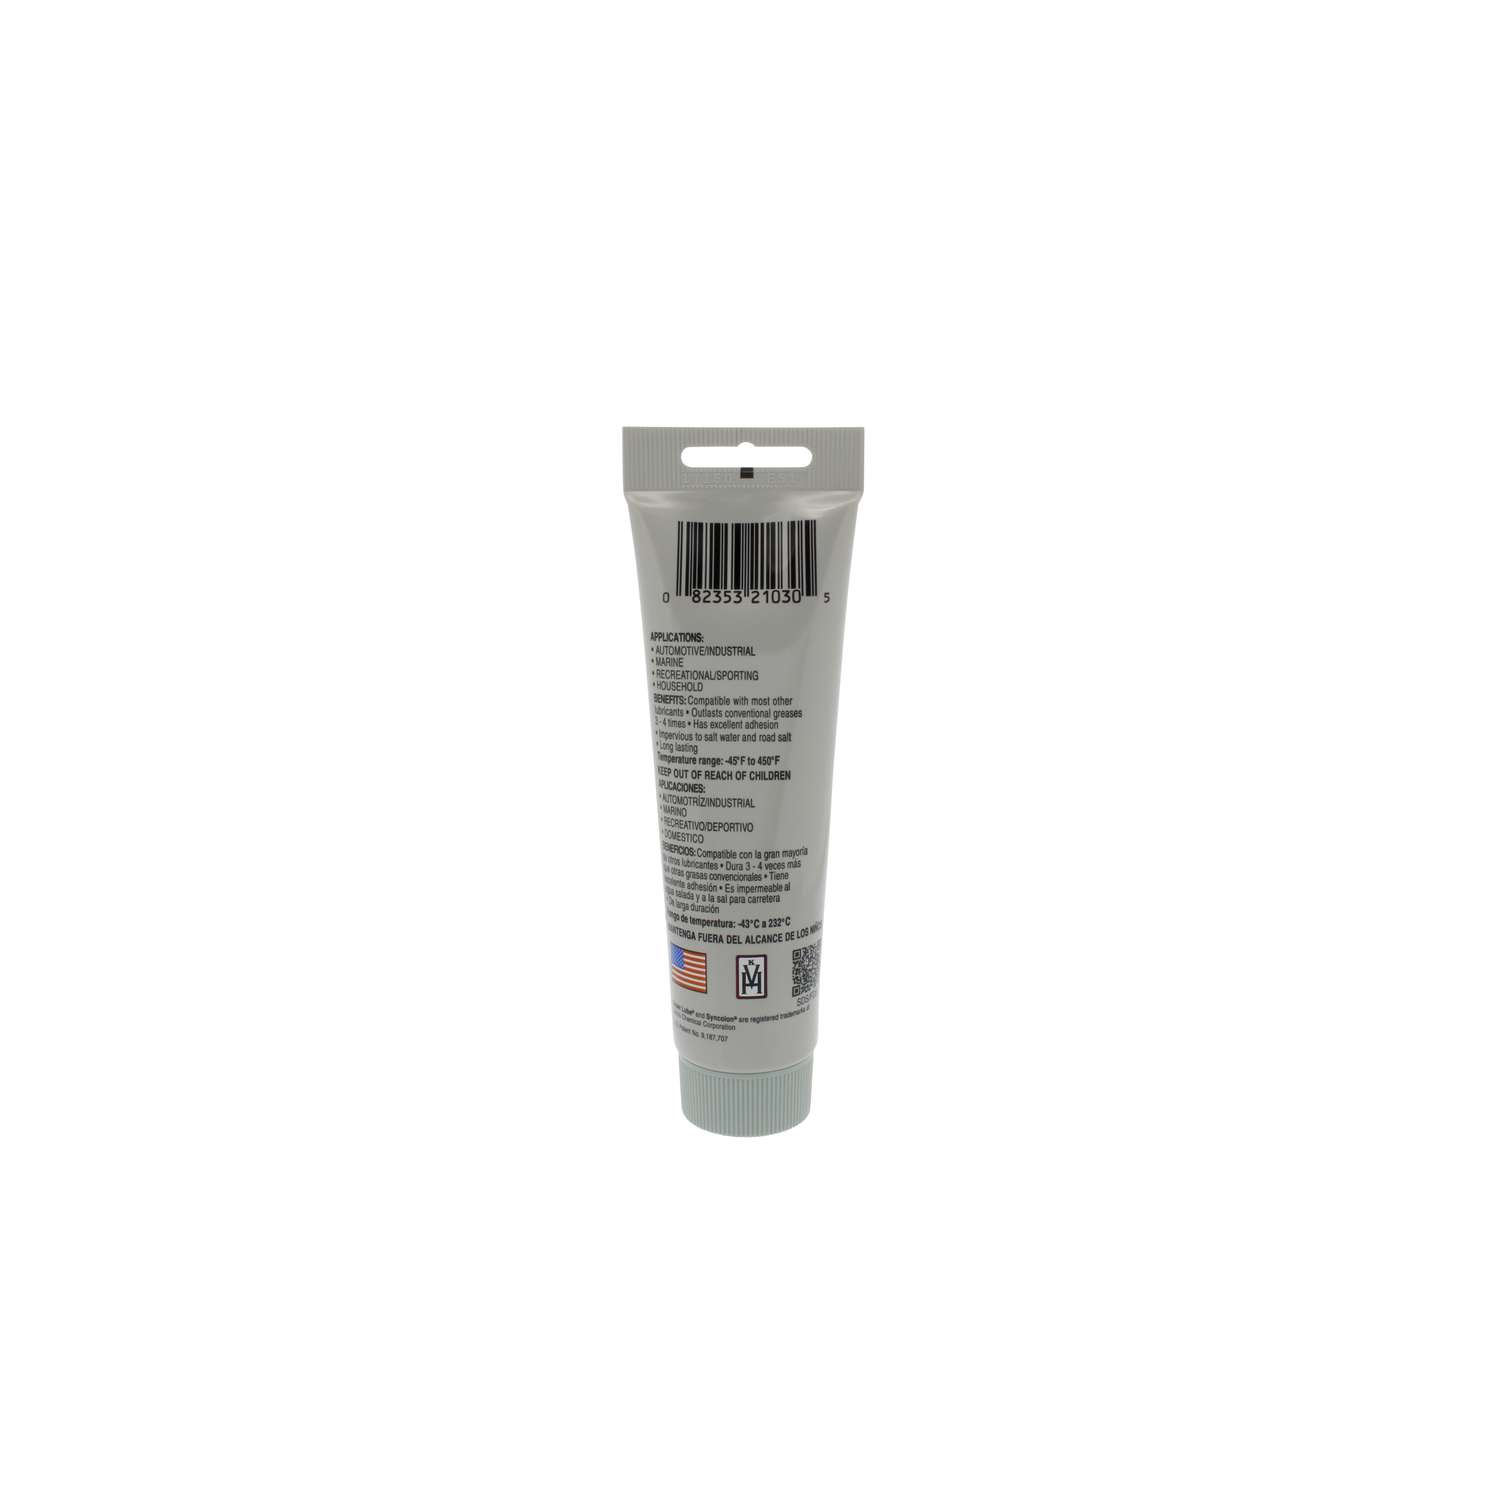 Super Lube Synthetic Grease 3 oz - Ace Hardware